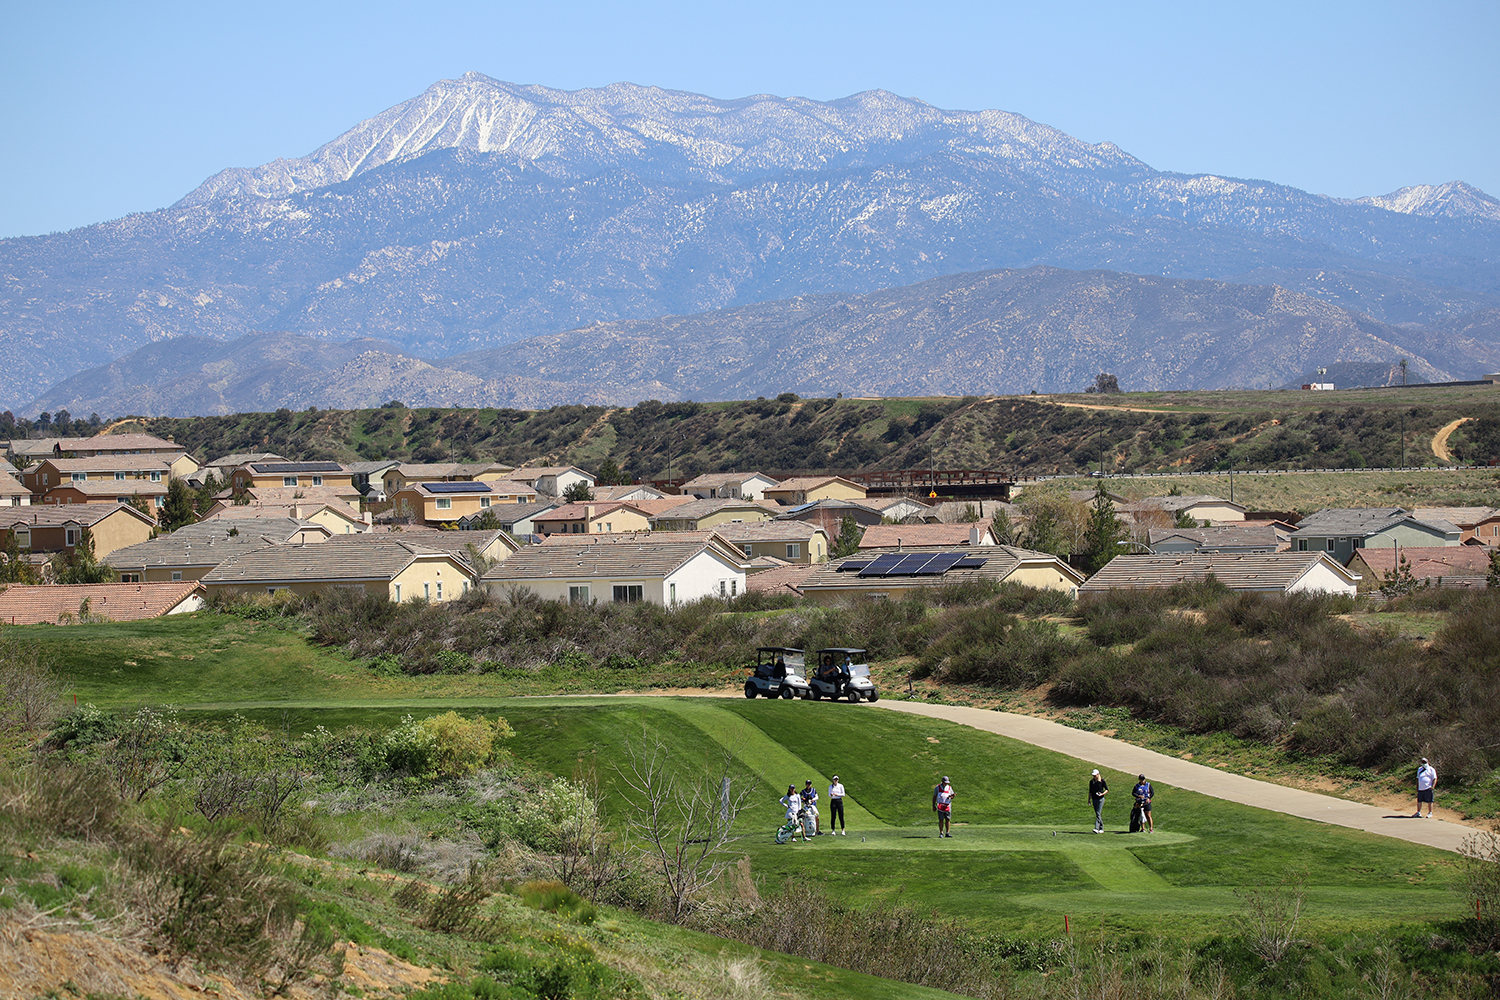 Golfing view with mountains and houses